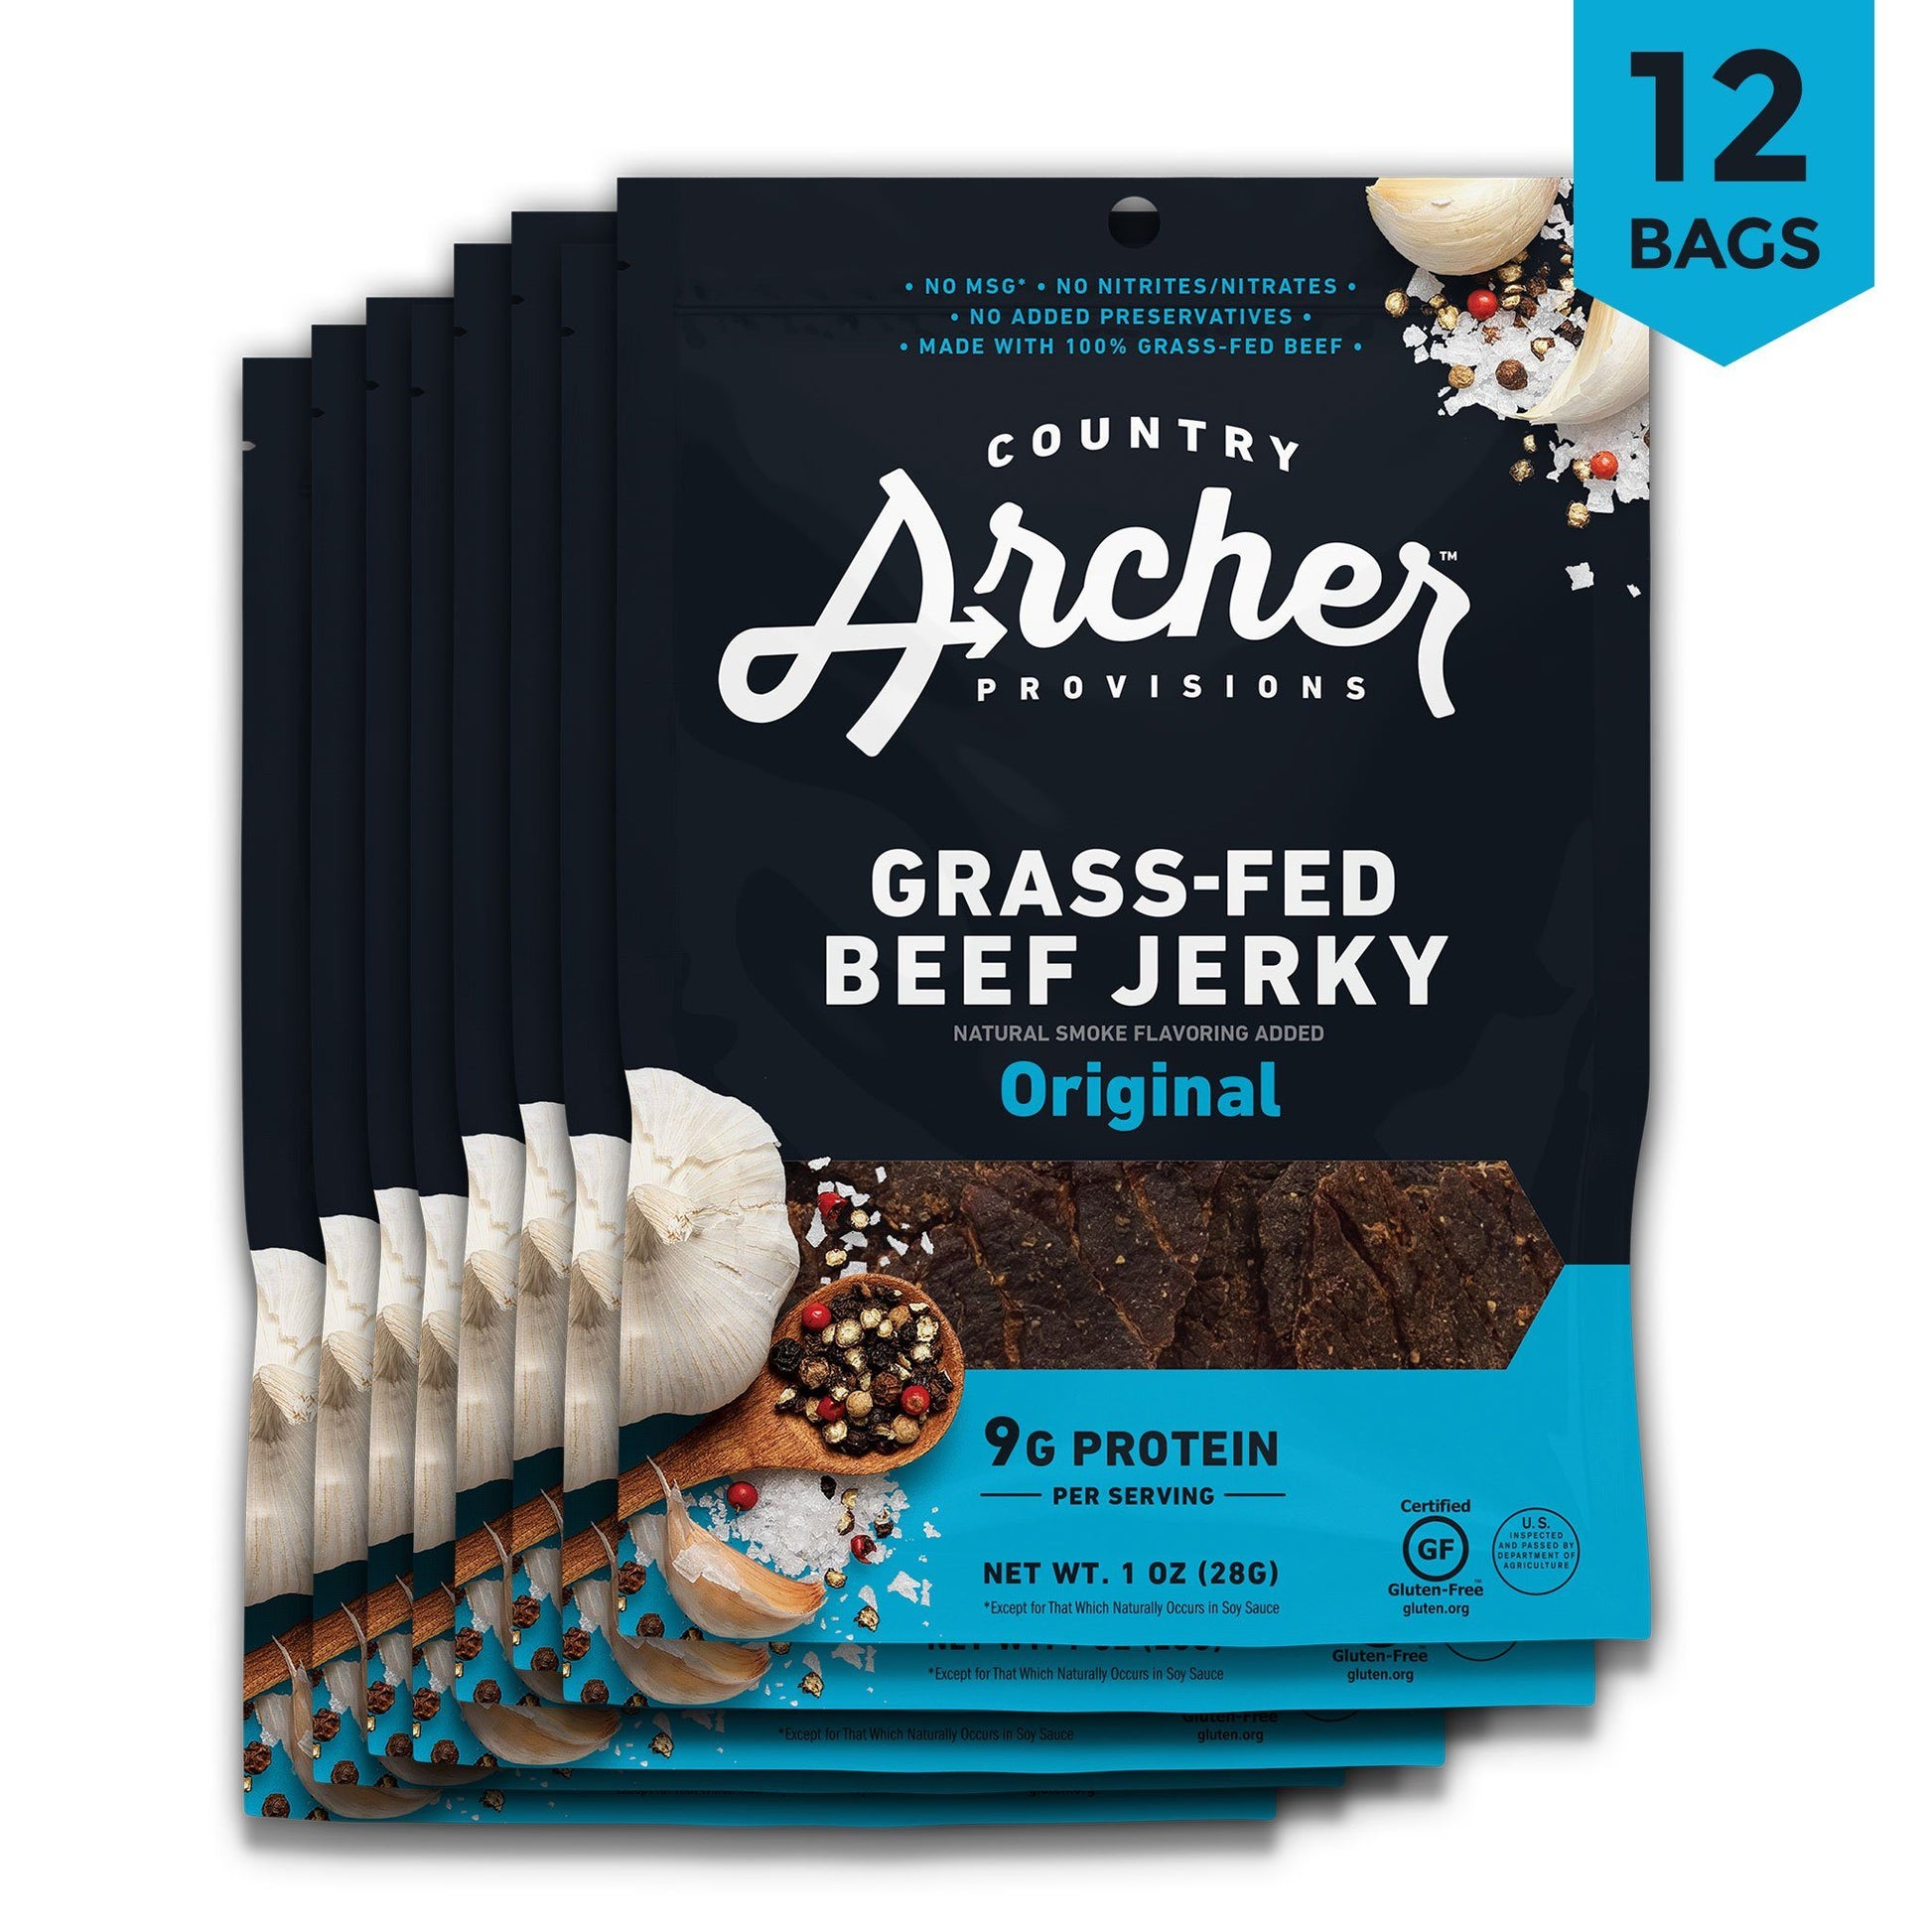 Fuego Beef Stick  Country Archer – Country Archer Provisions